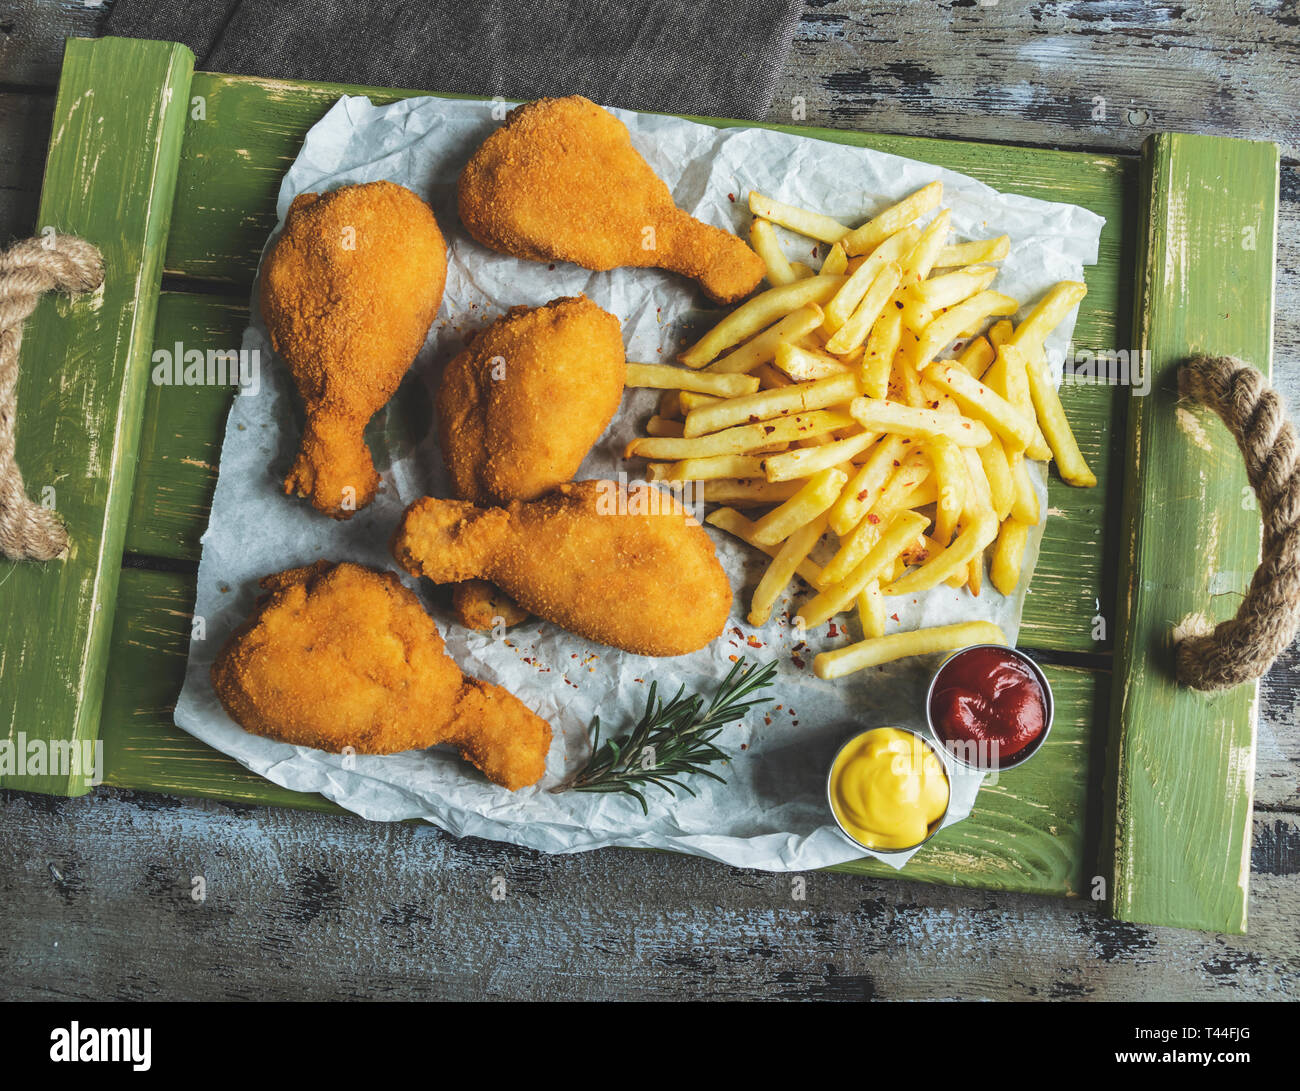 crispy fried chicken legs breaded golden color, french fries, sauce, wooden background Stock Photo